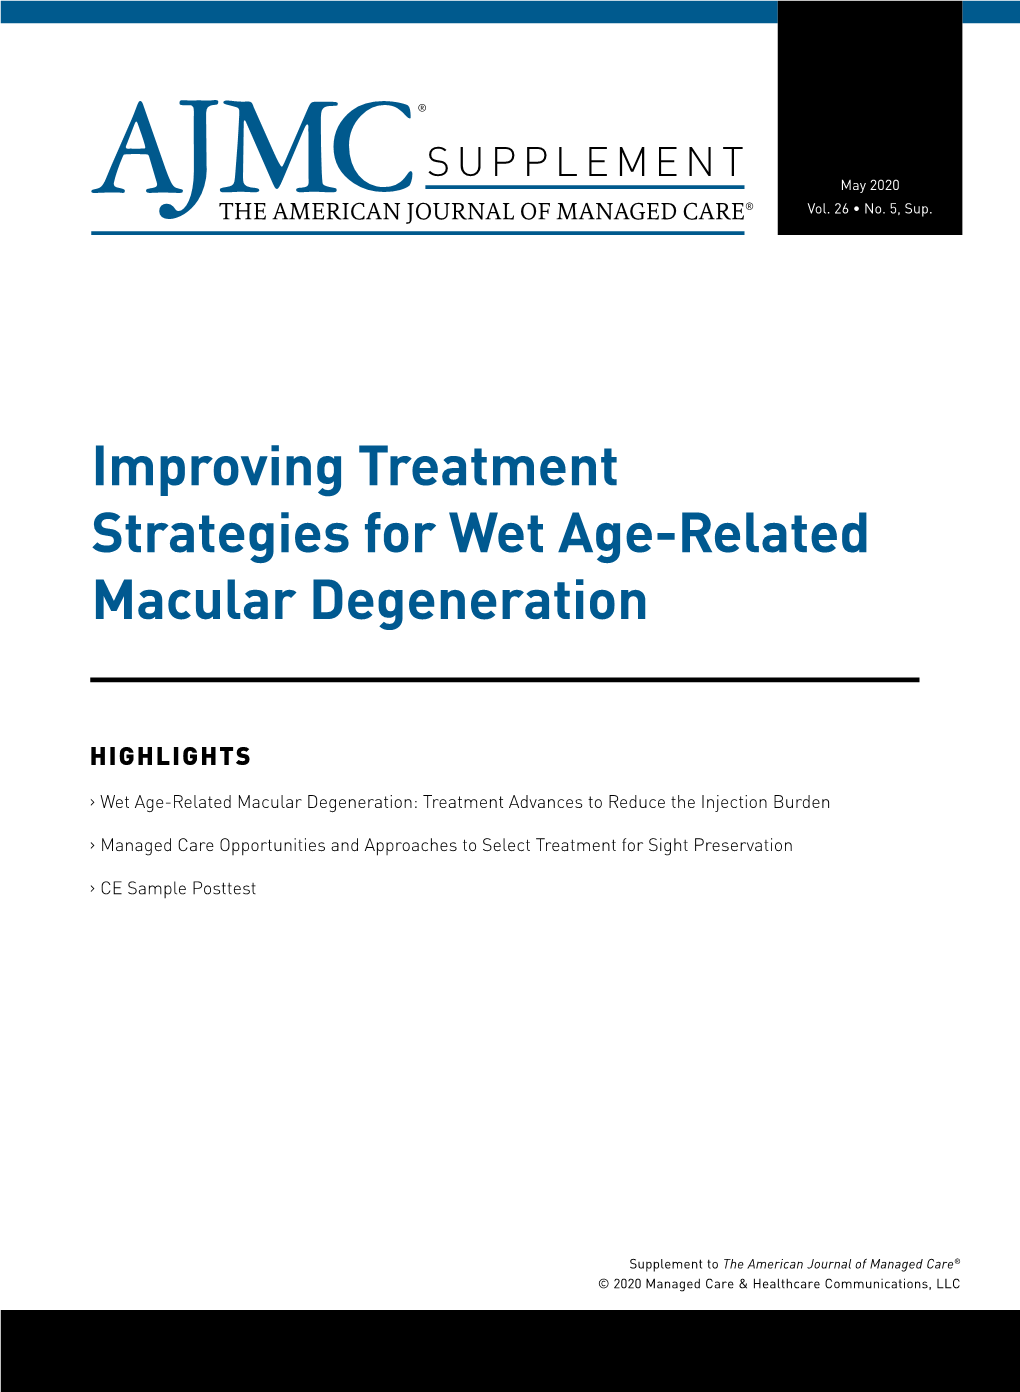 Improving Treatment Strategies for Wet Age-Related Macular Degeneration